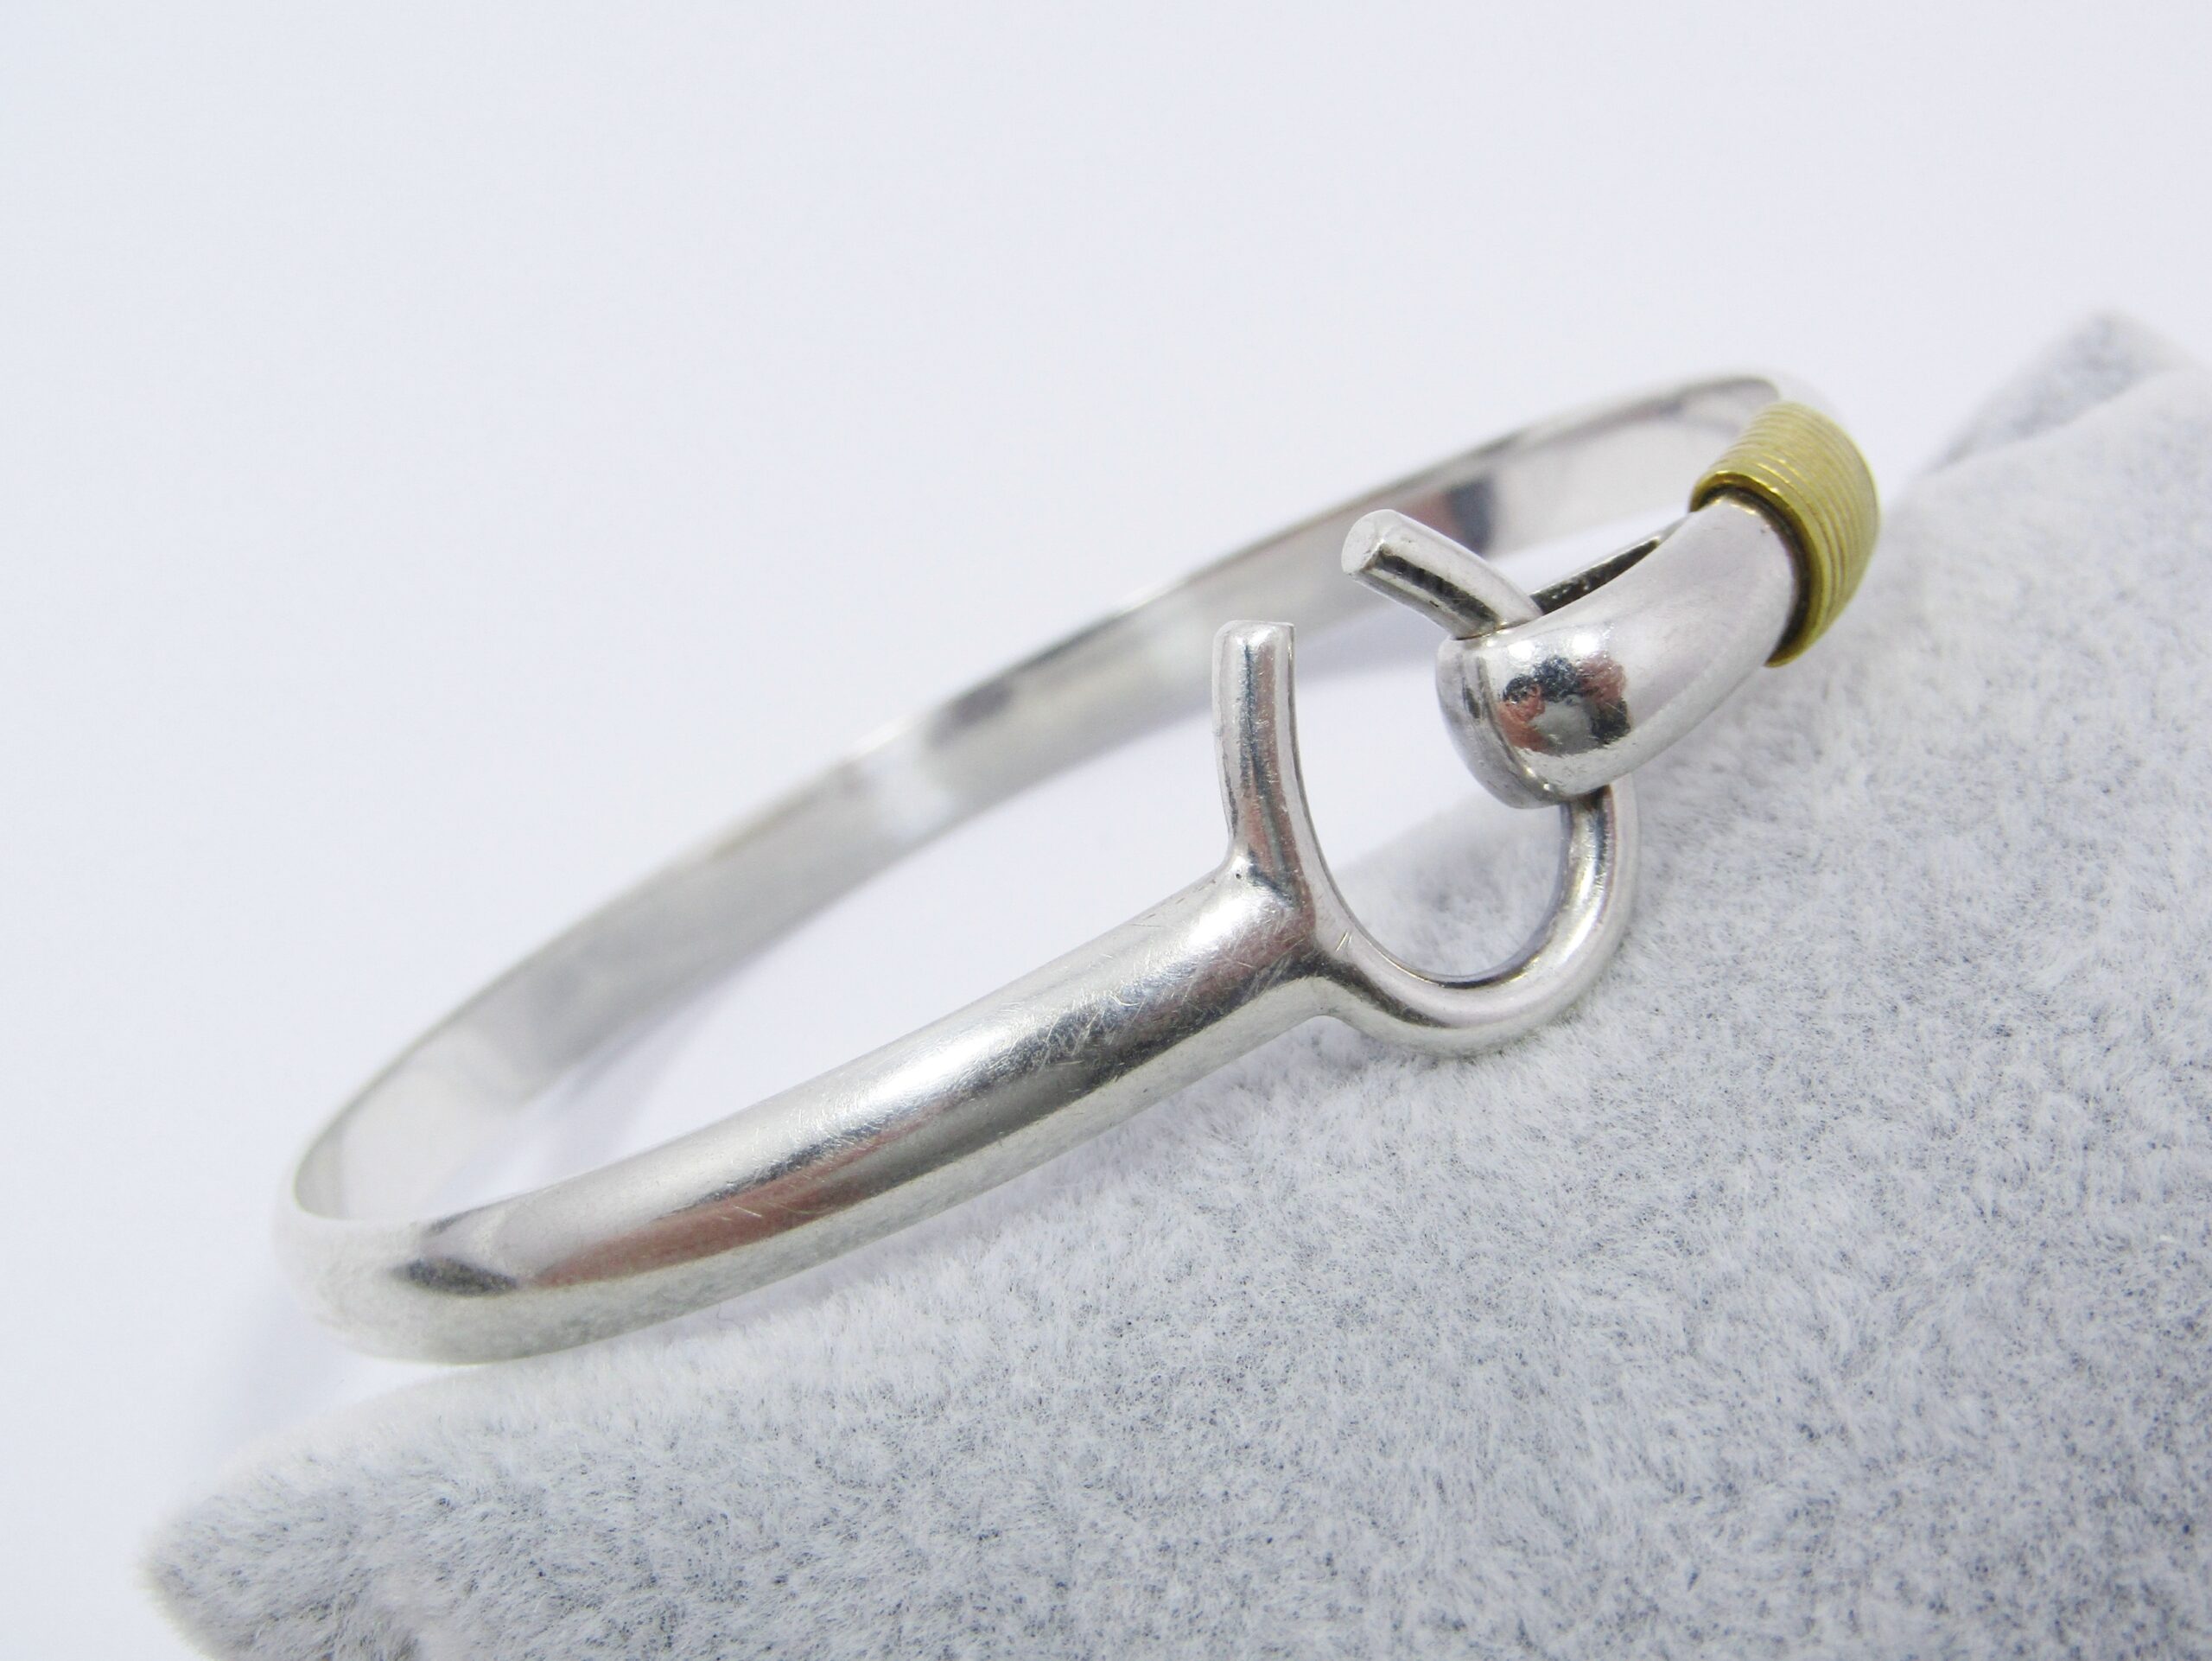 A Gorgeous Two Tone Cuff Design Bangle in Sterling Silver.